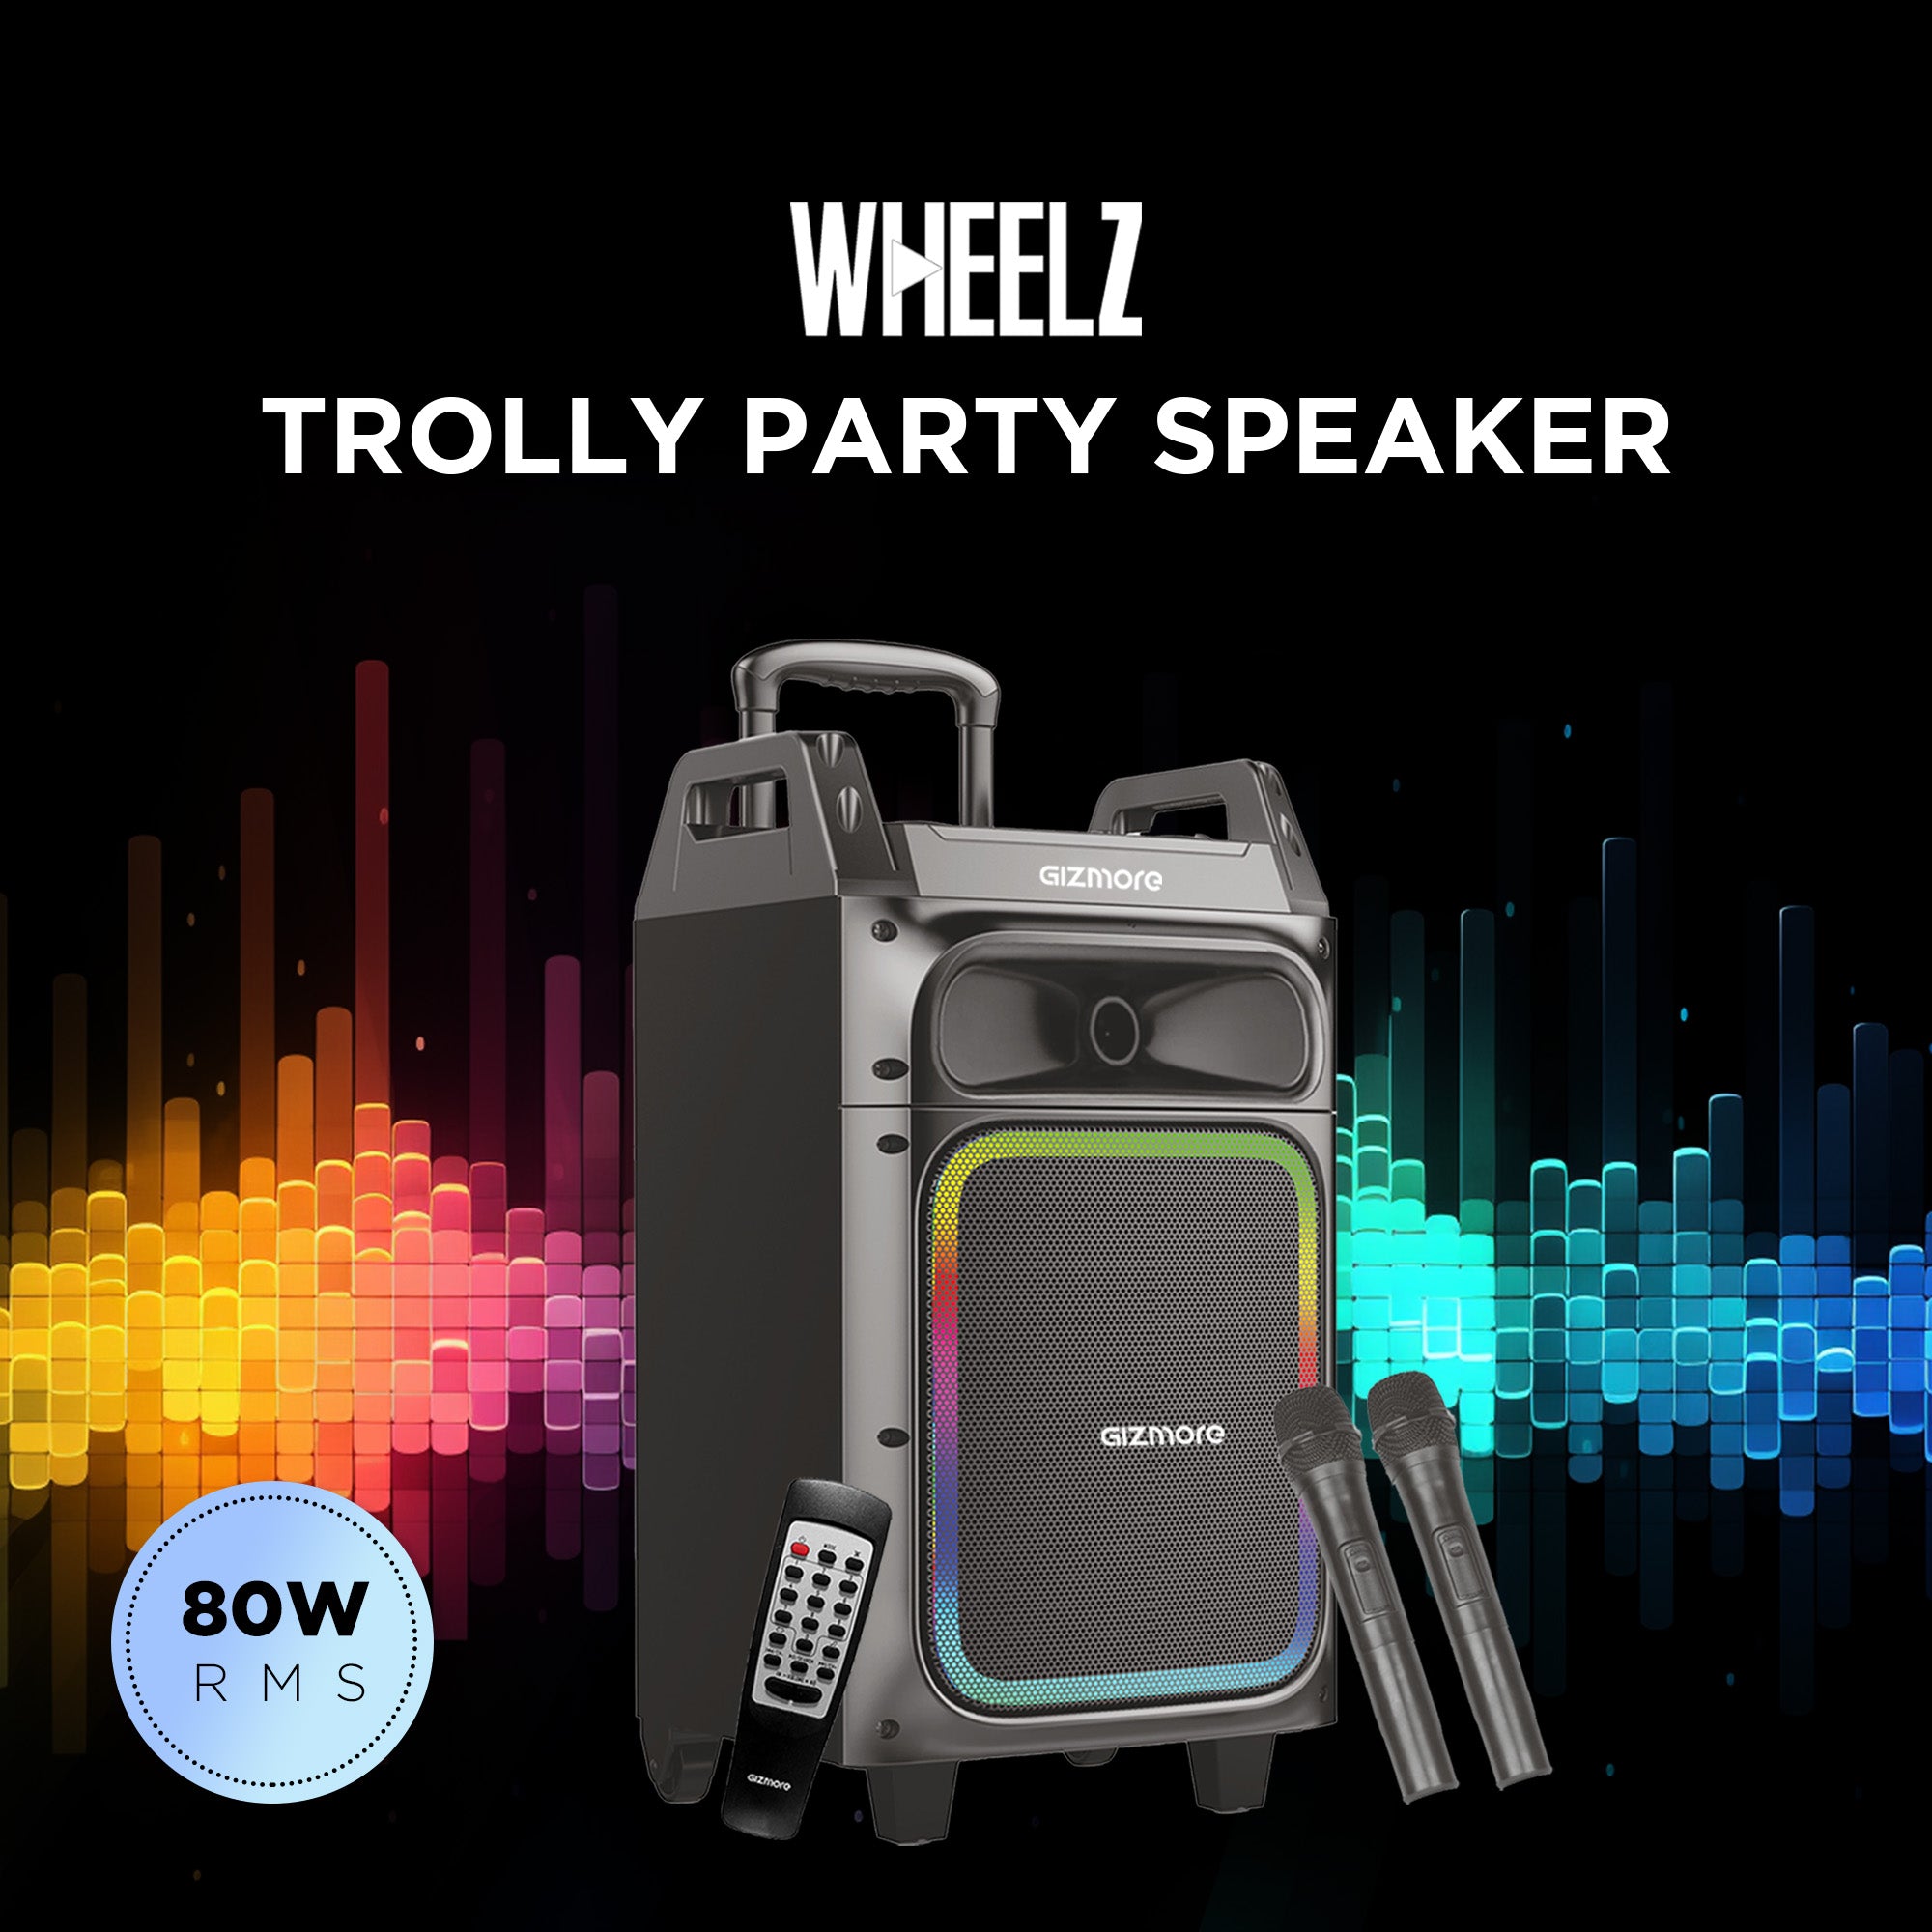 GIZMORE 80W T5000 Pro Trolley Party Speaker with Dual Wireless MIC, 4 Hrs Playtime, Supporting Digital LED Display, RGB Lights, Connect with Bluetooth, USB, FM, AUX & SD Card, Guitar and Remote Control